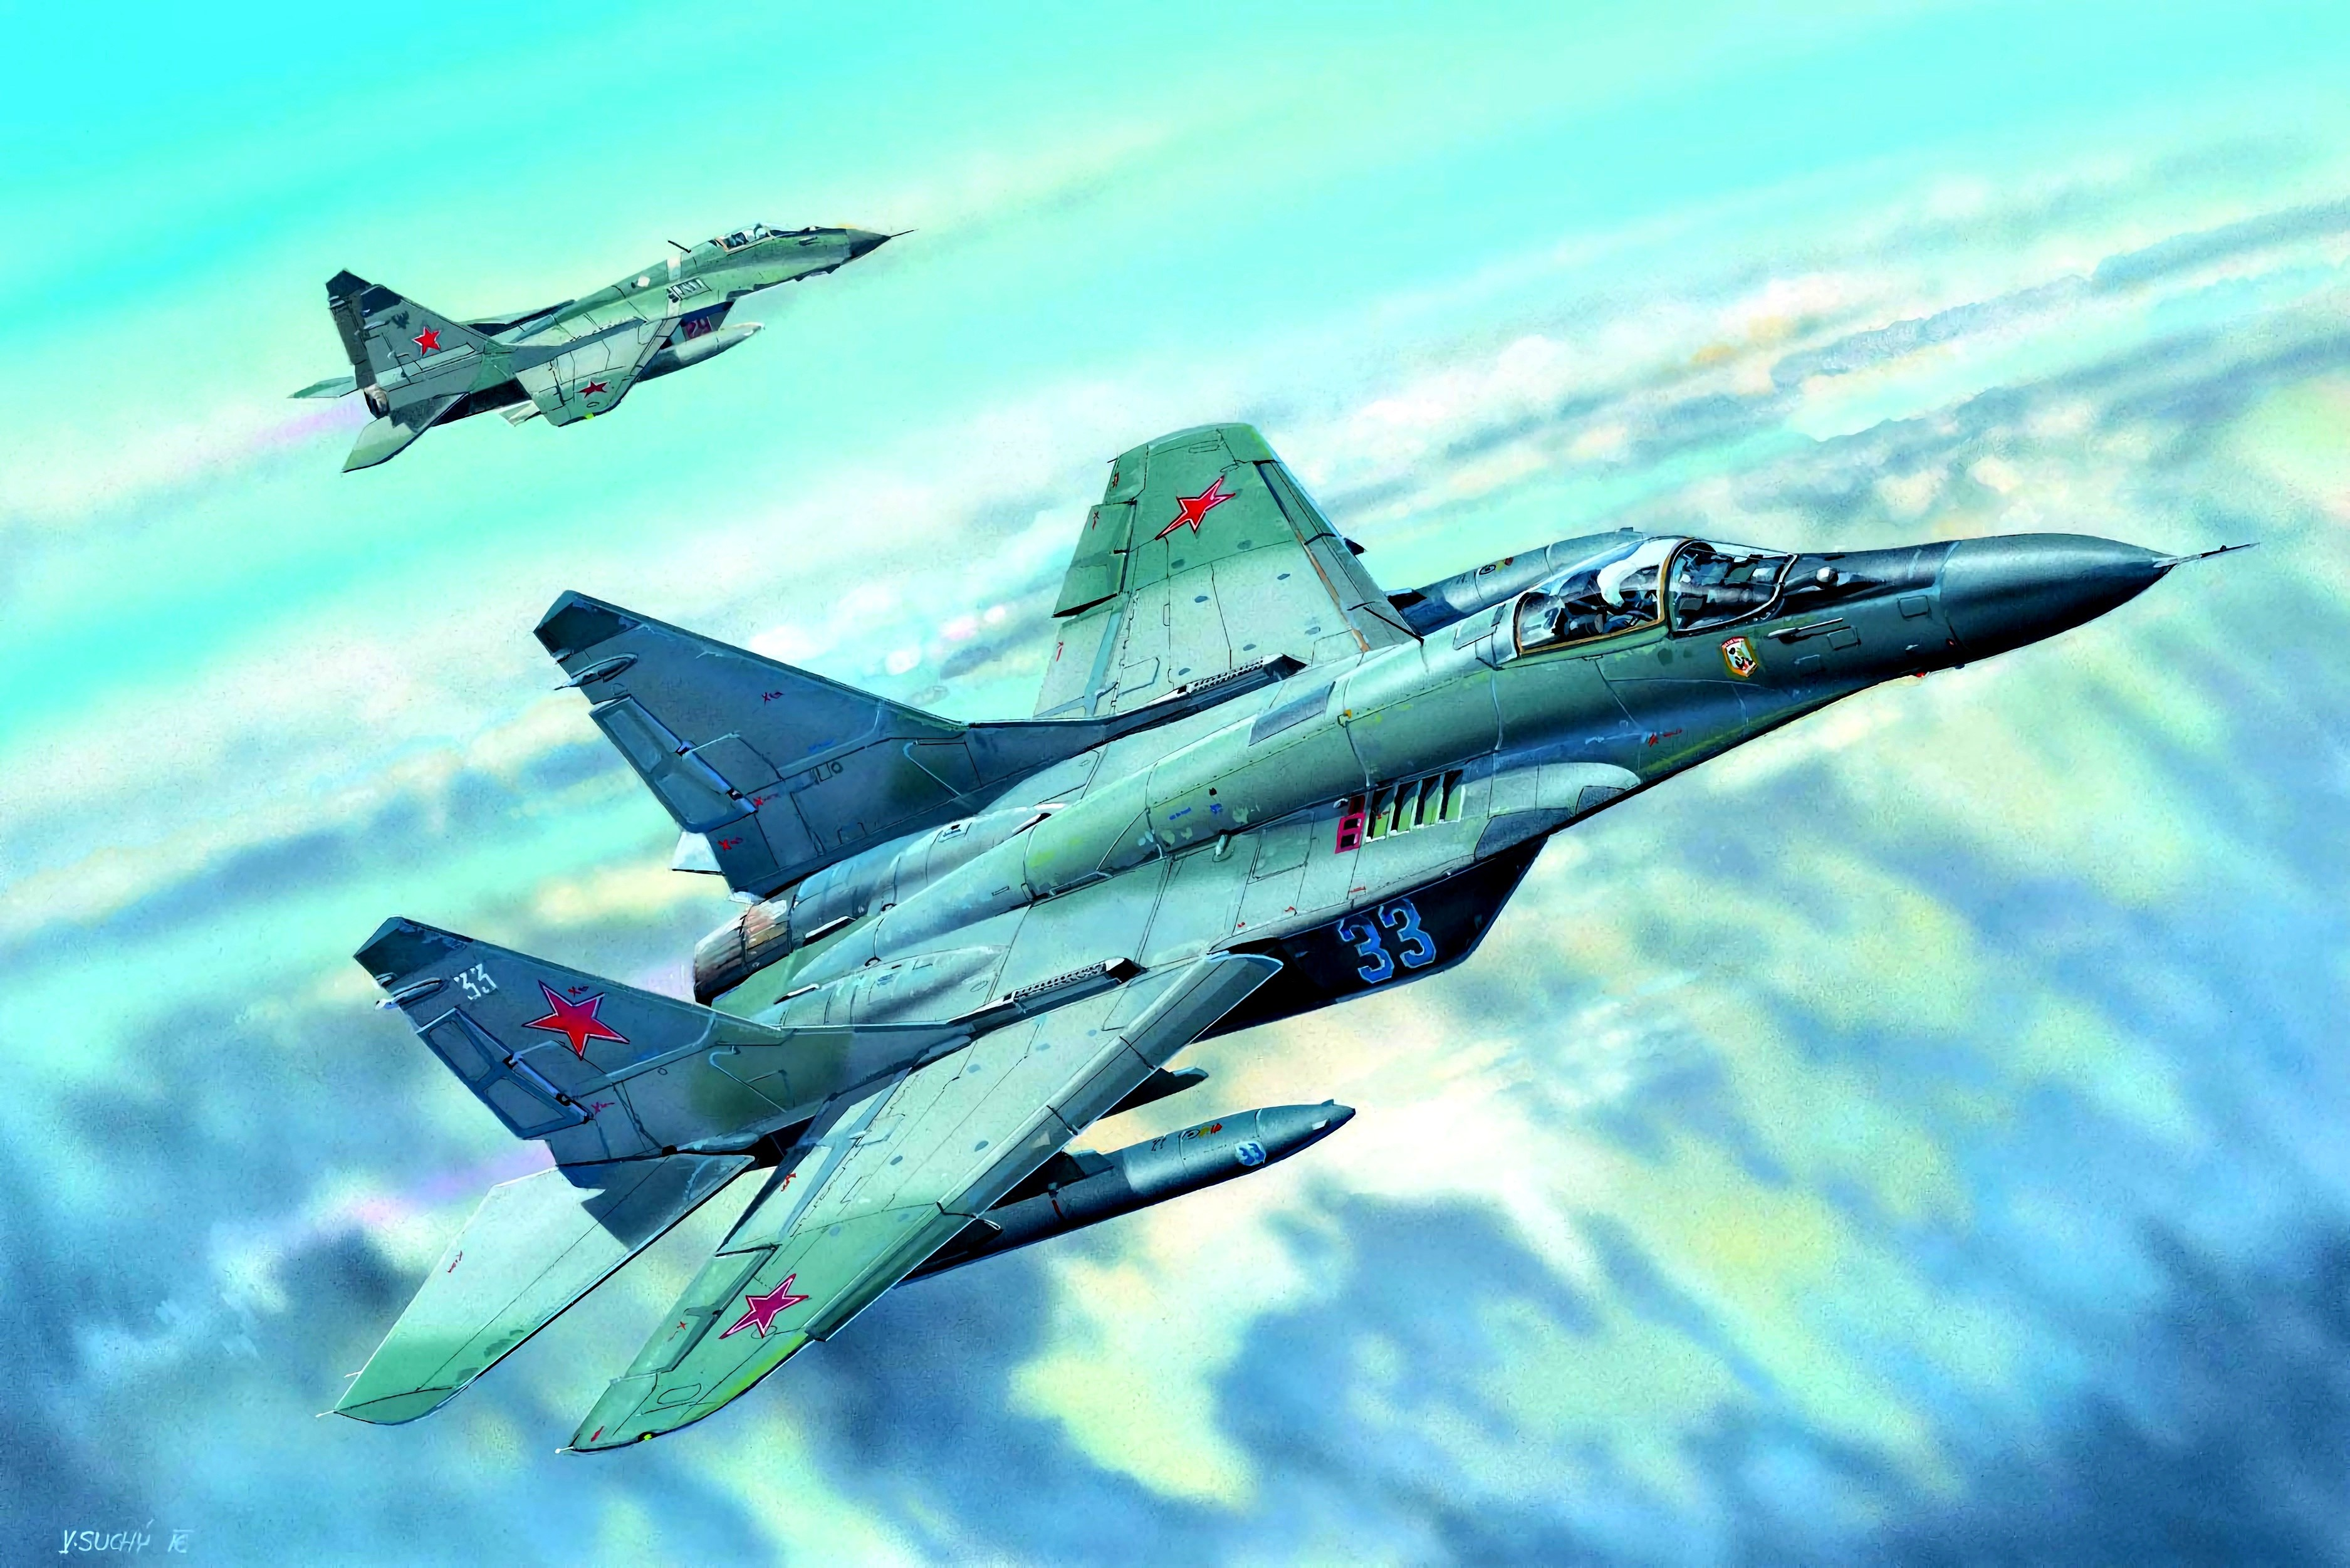 Jet Fighter Sky Clouds Blue White Red Red Star Communism Military Air Force Aircraft Mikoyan MiG 29 3750x2502